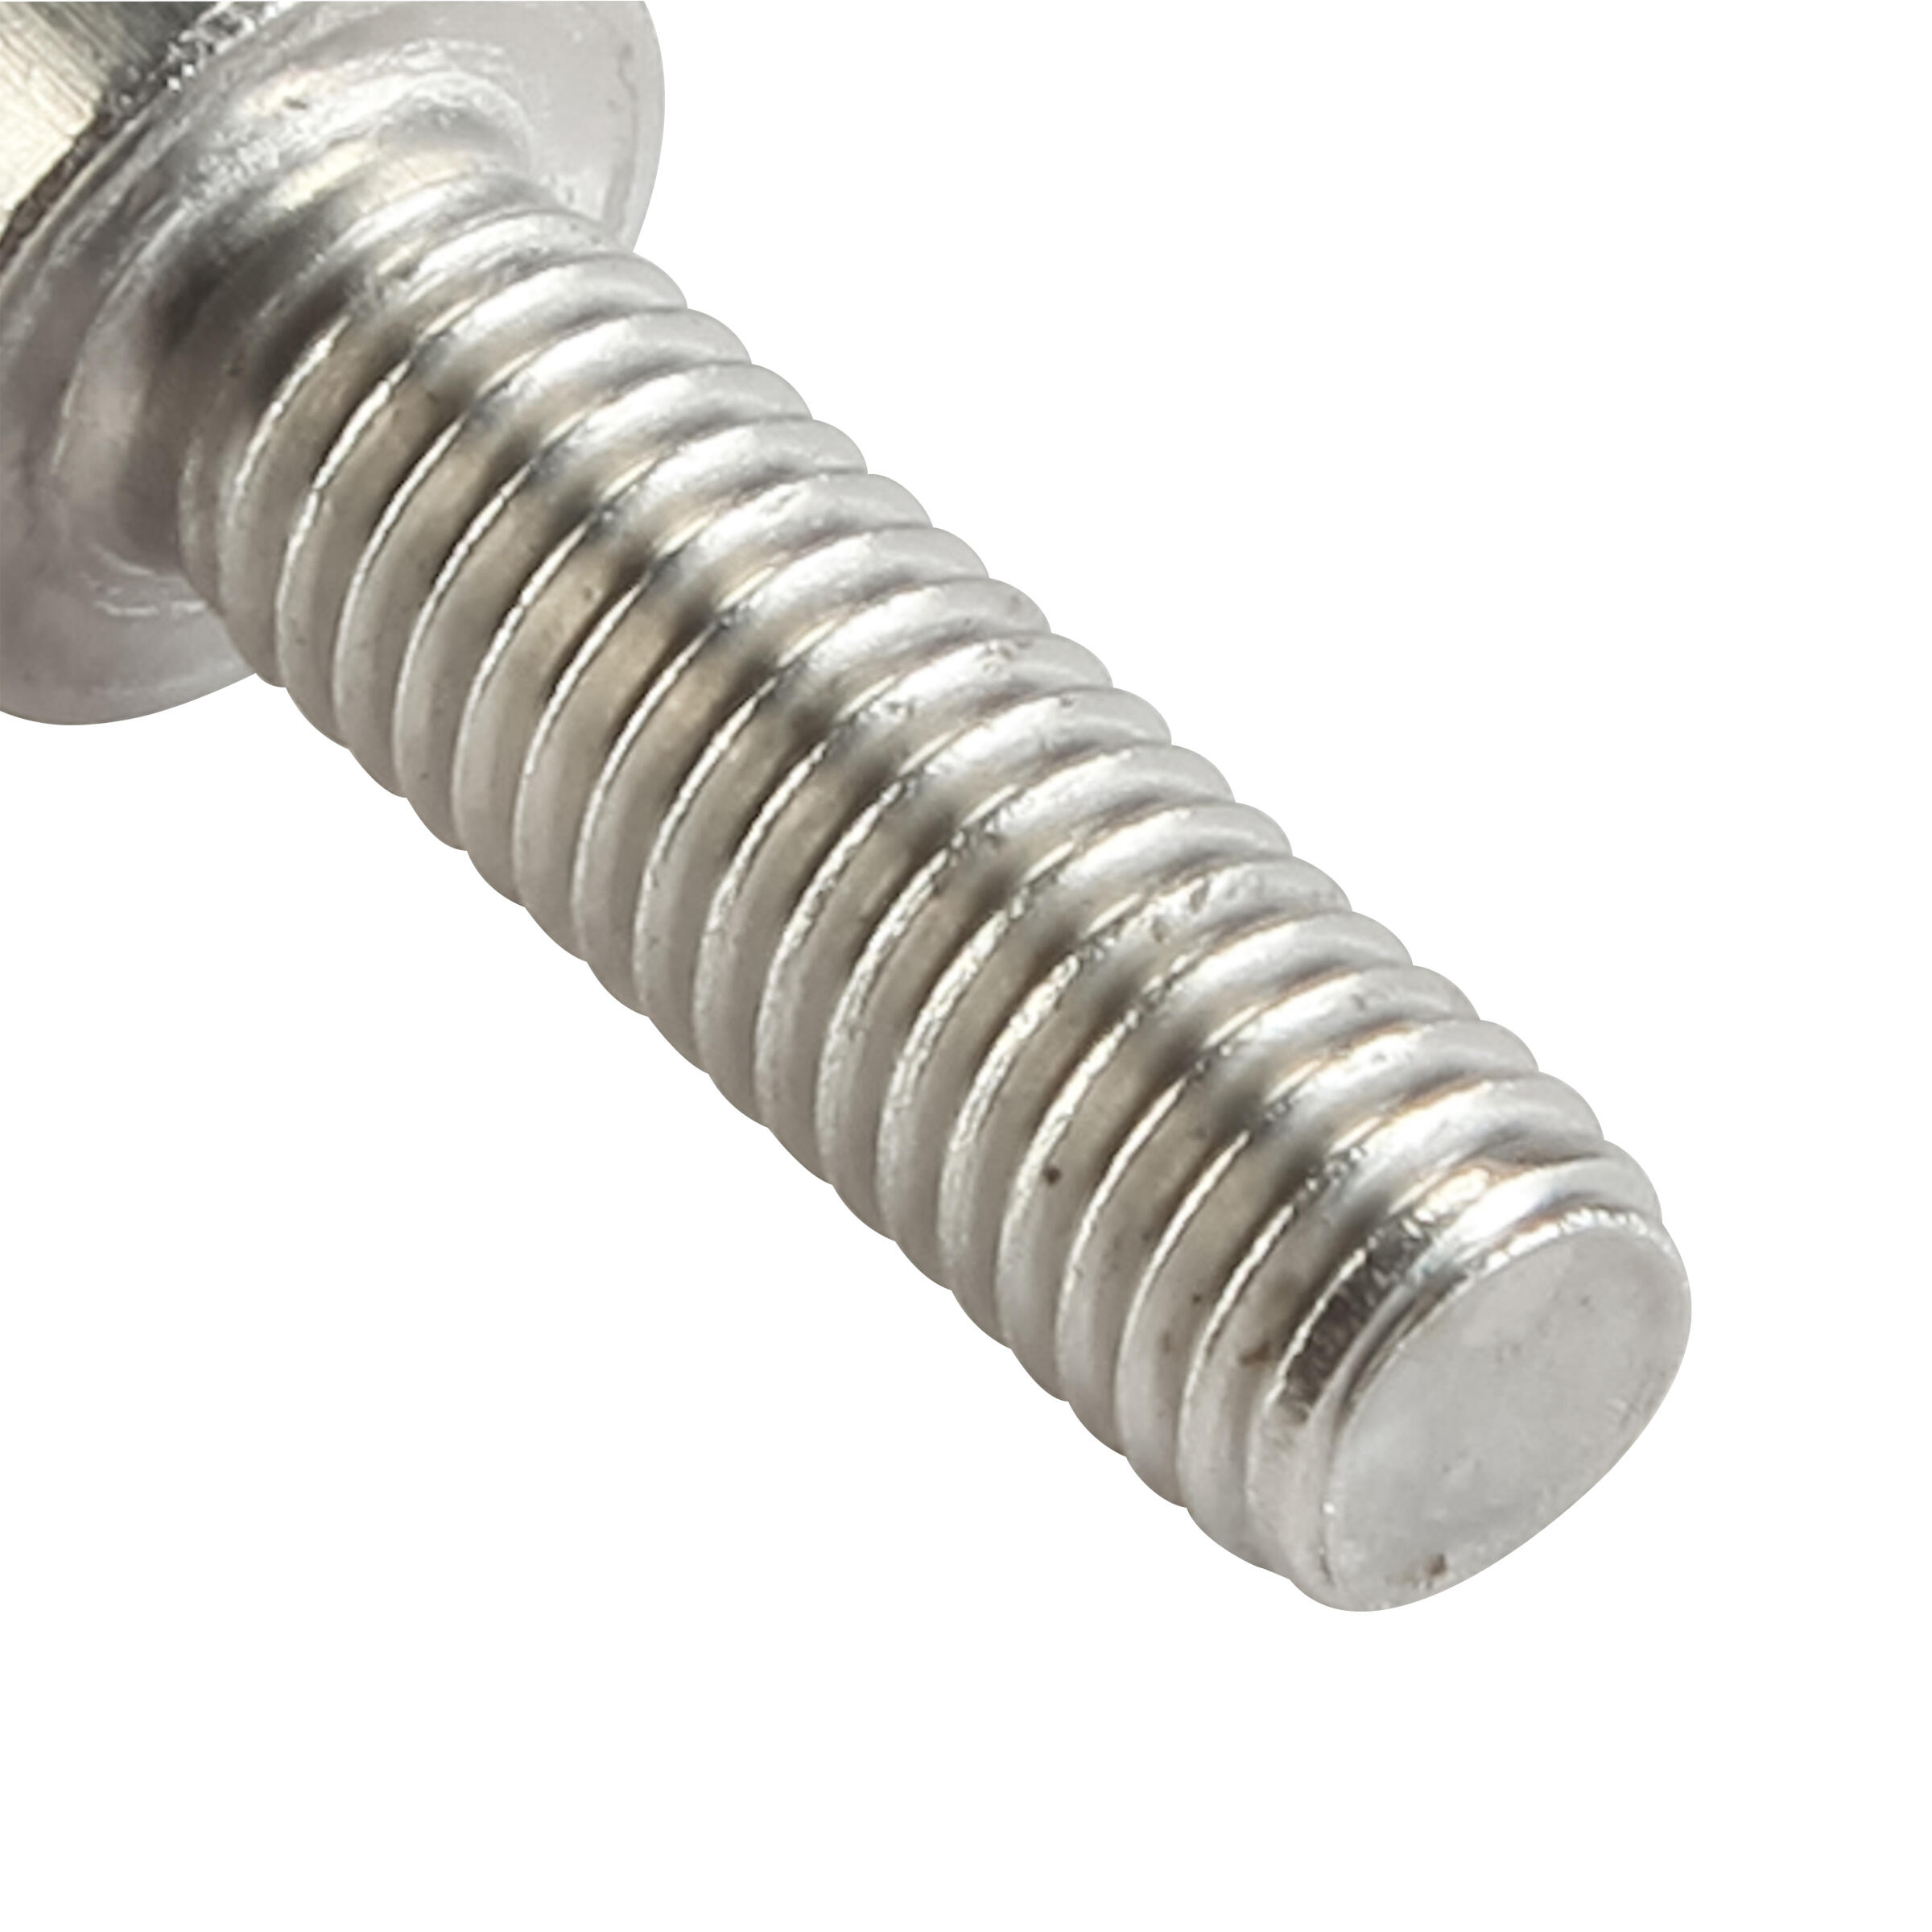 water bottle cage screw size